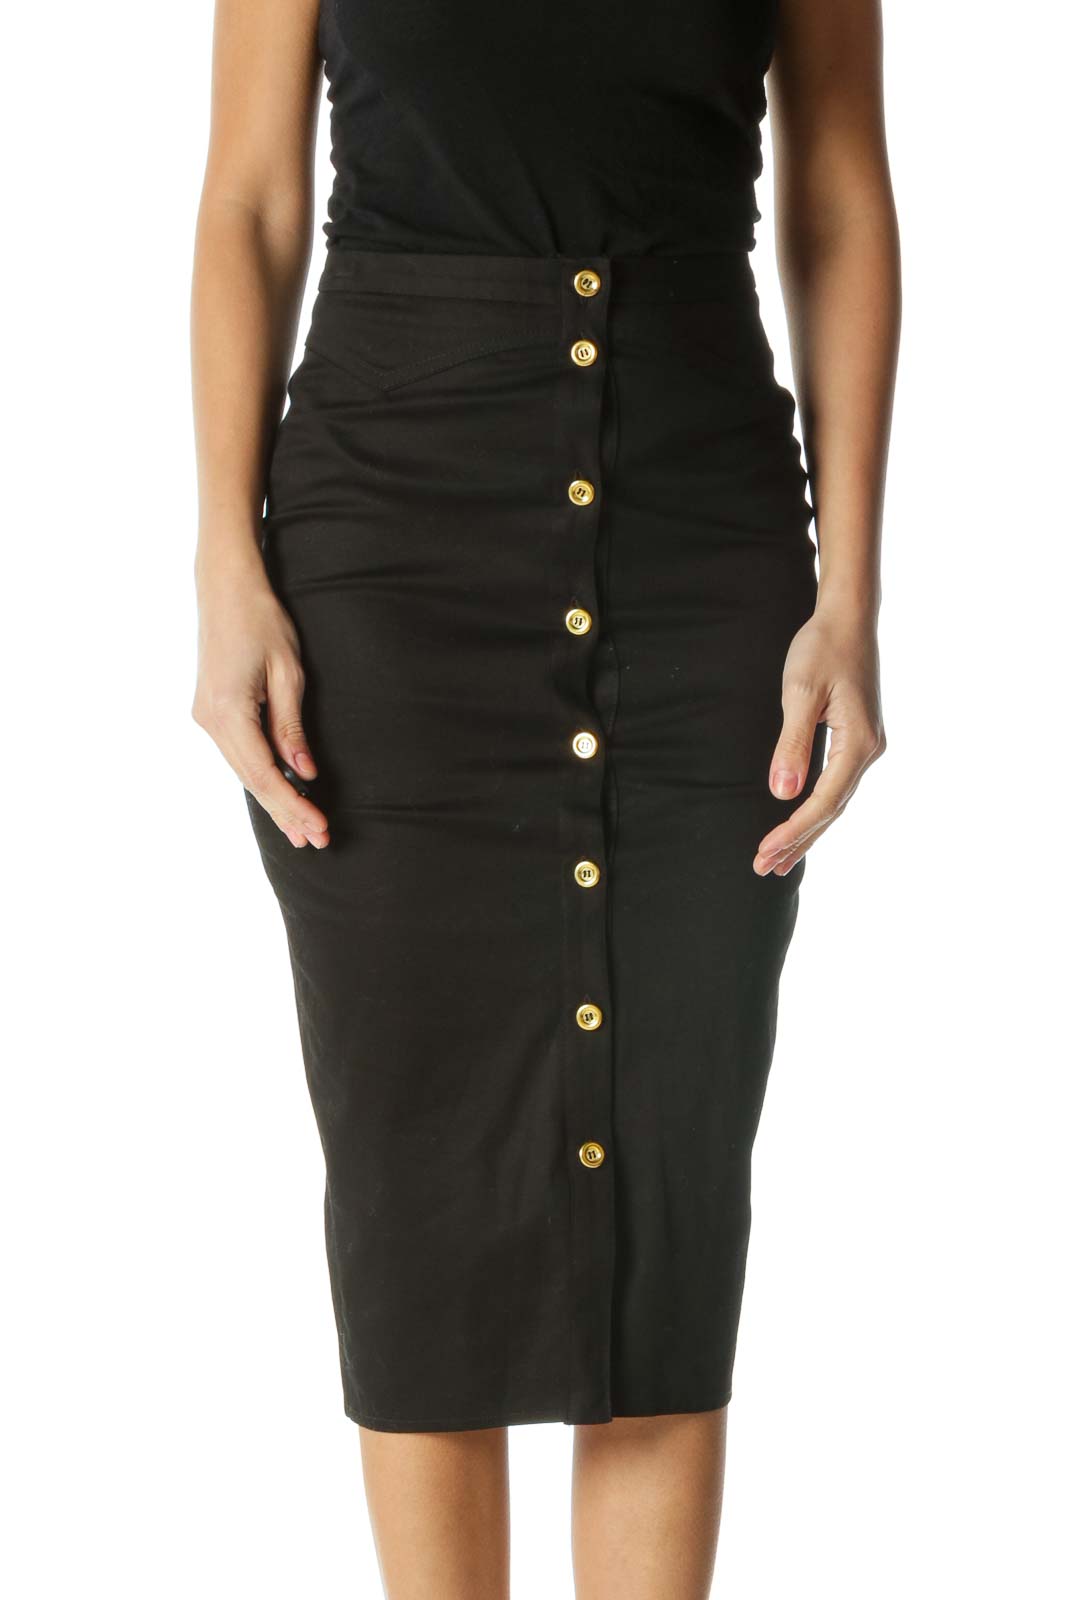 Black Pencil Skirt with Gold Buttons Front